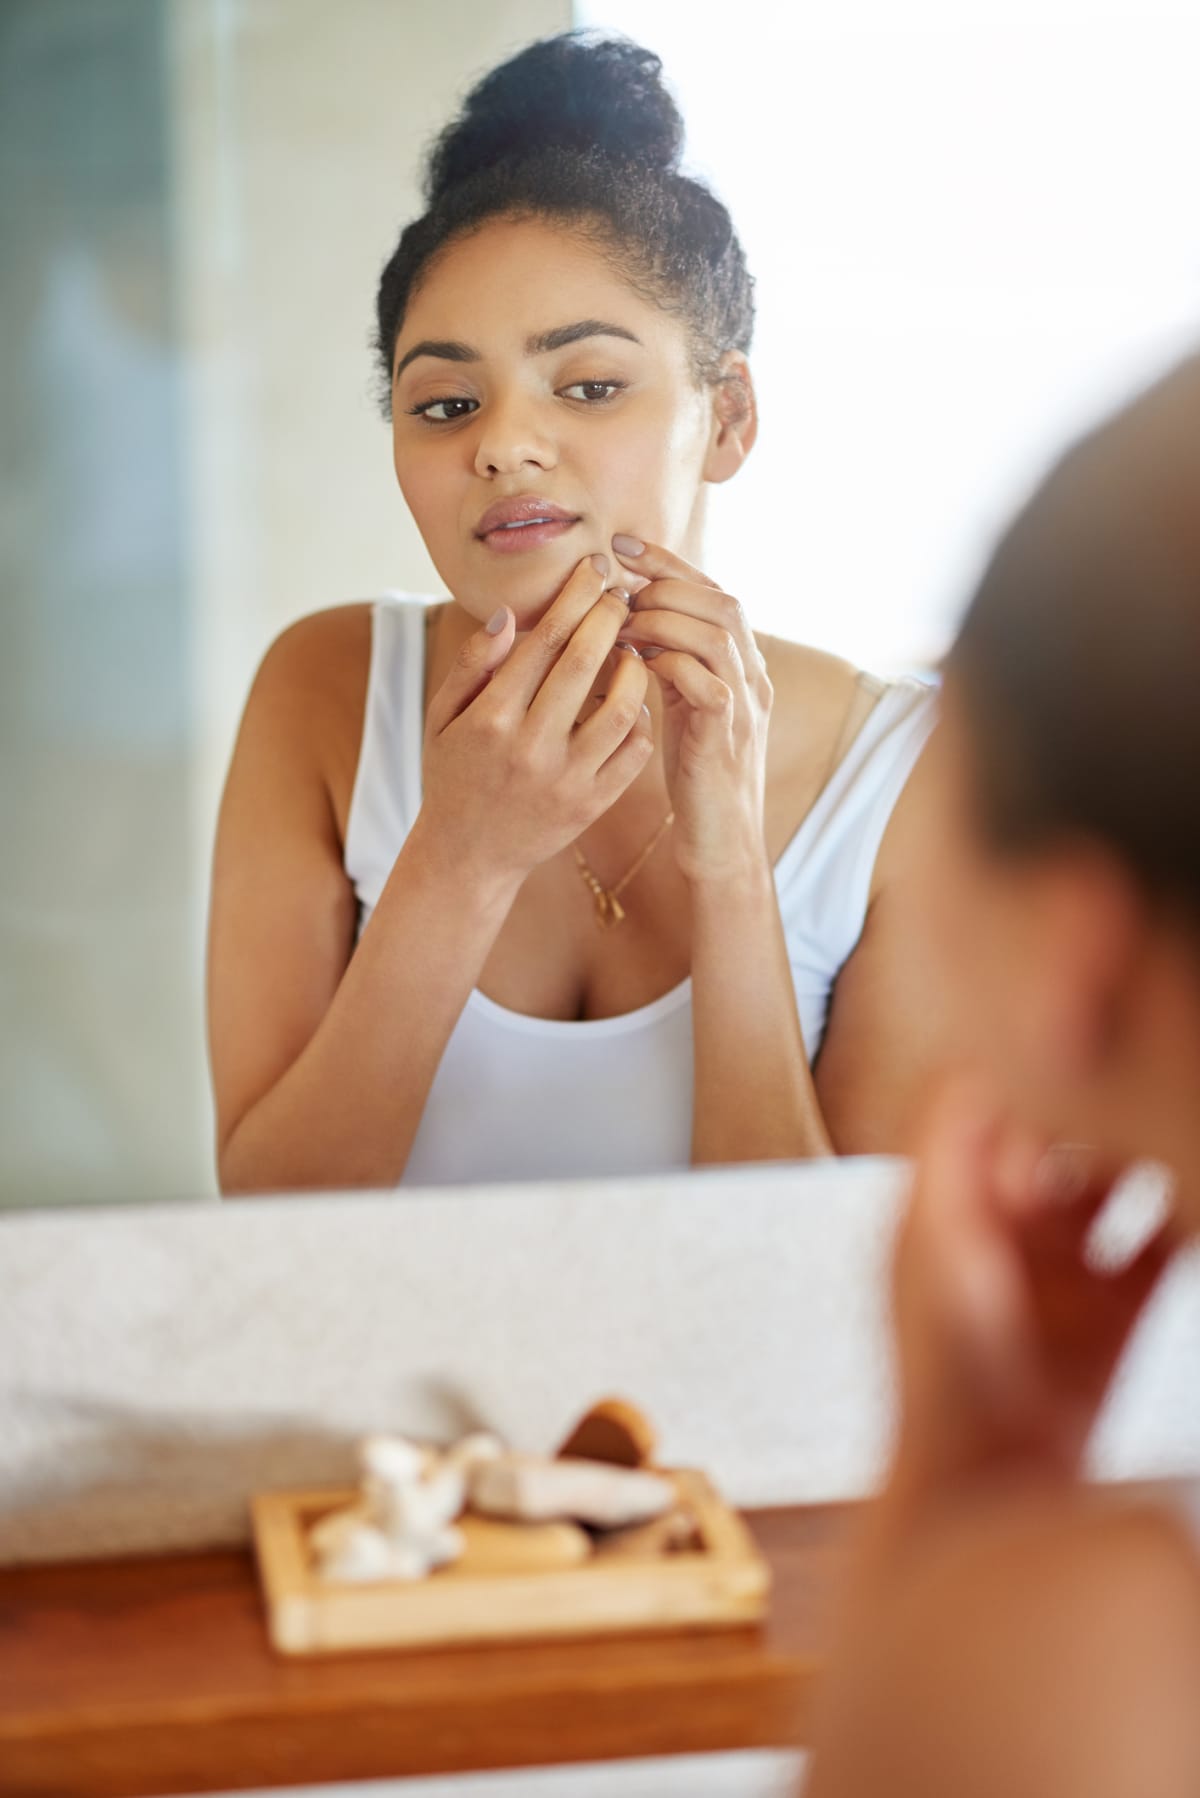 Shot of a young woman squeezing a pimple in front of the bathroom mirror